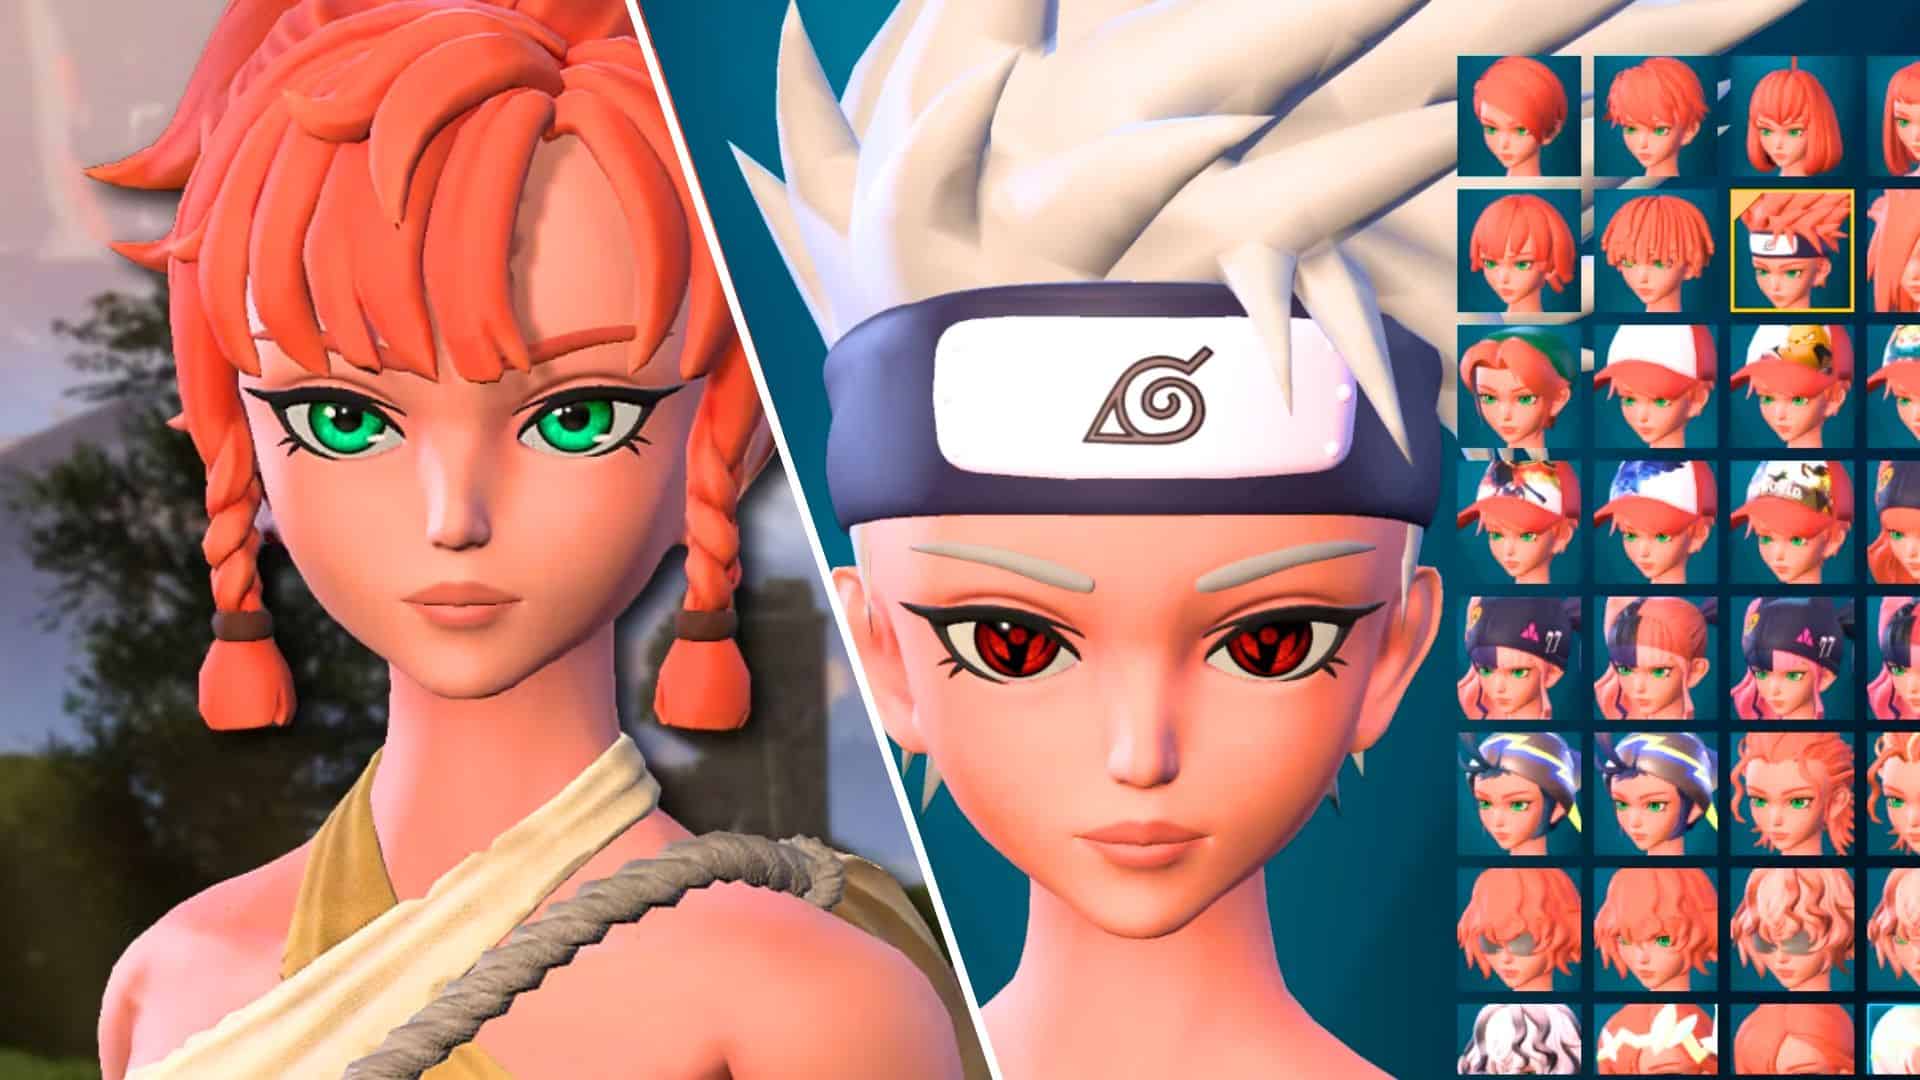 Palworld players can get over 50 new amazing hairstyles for character creator